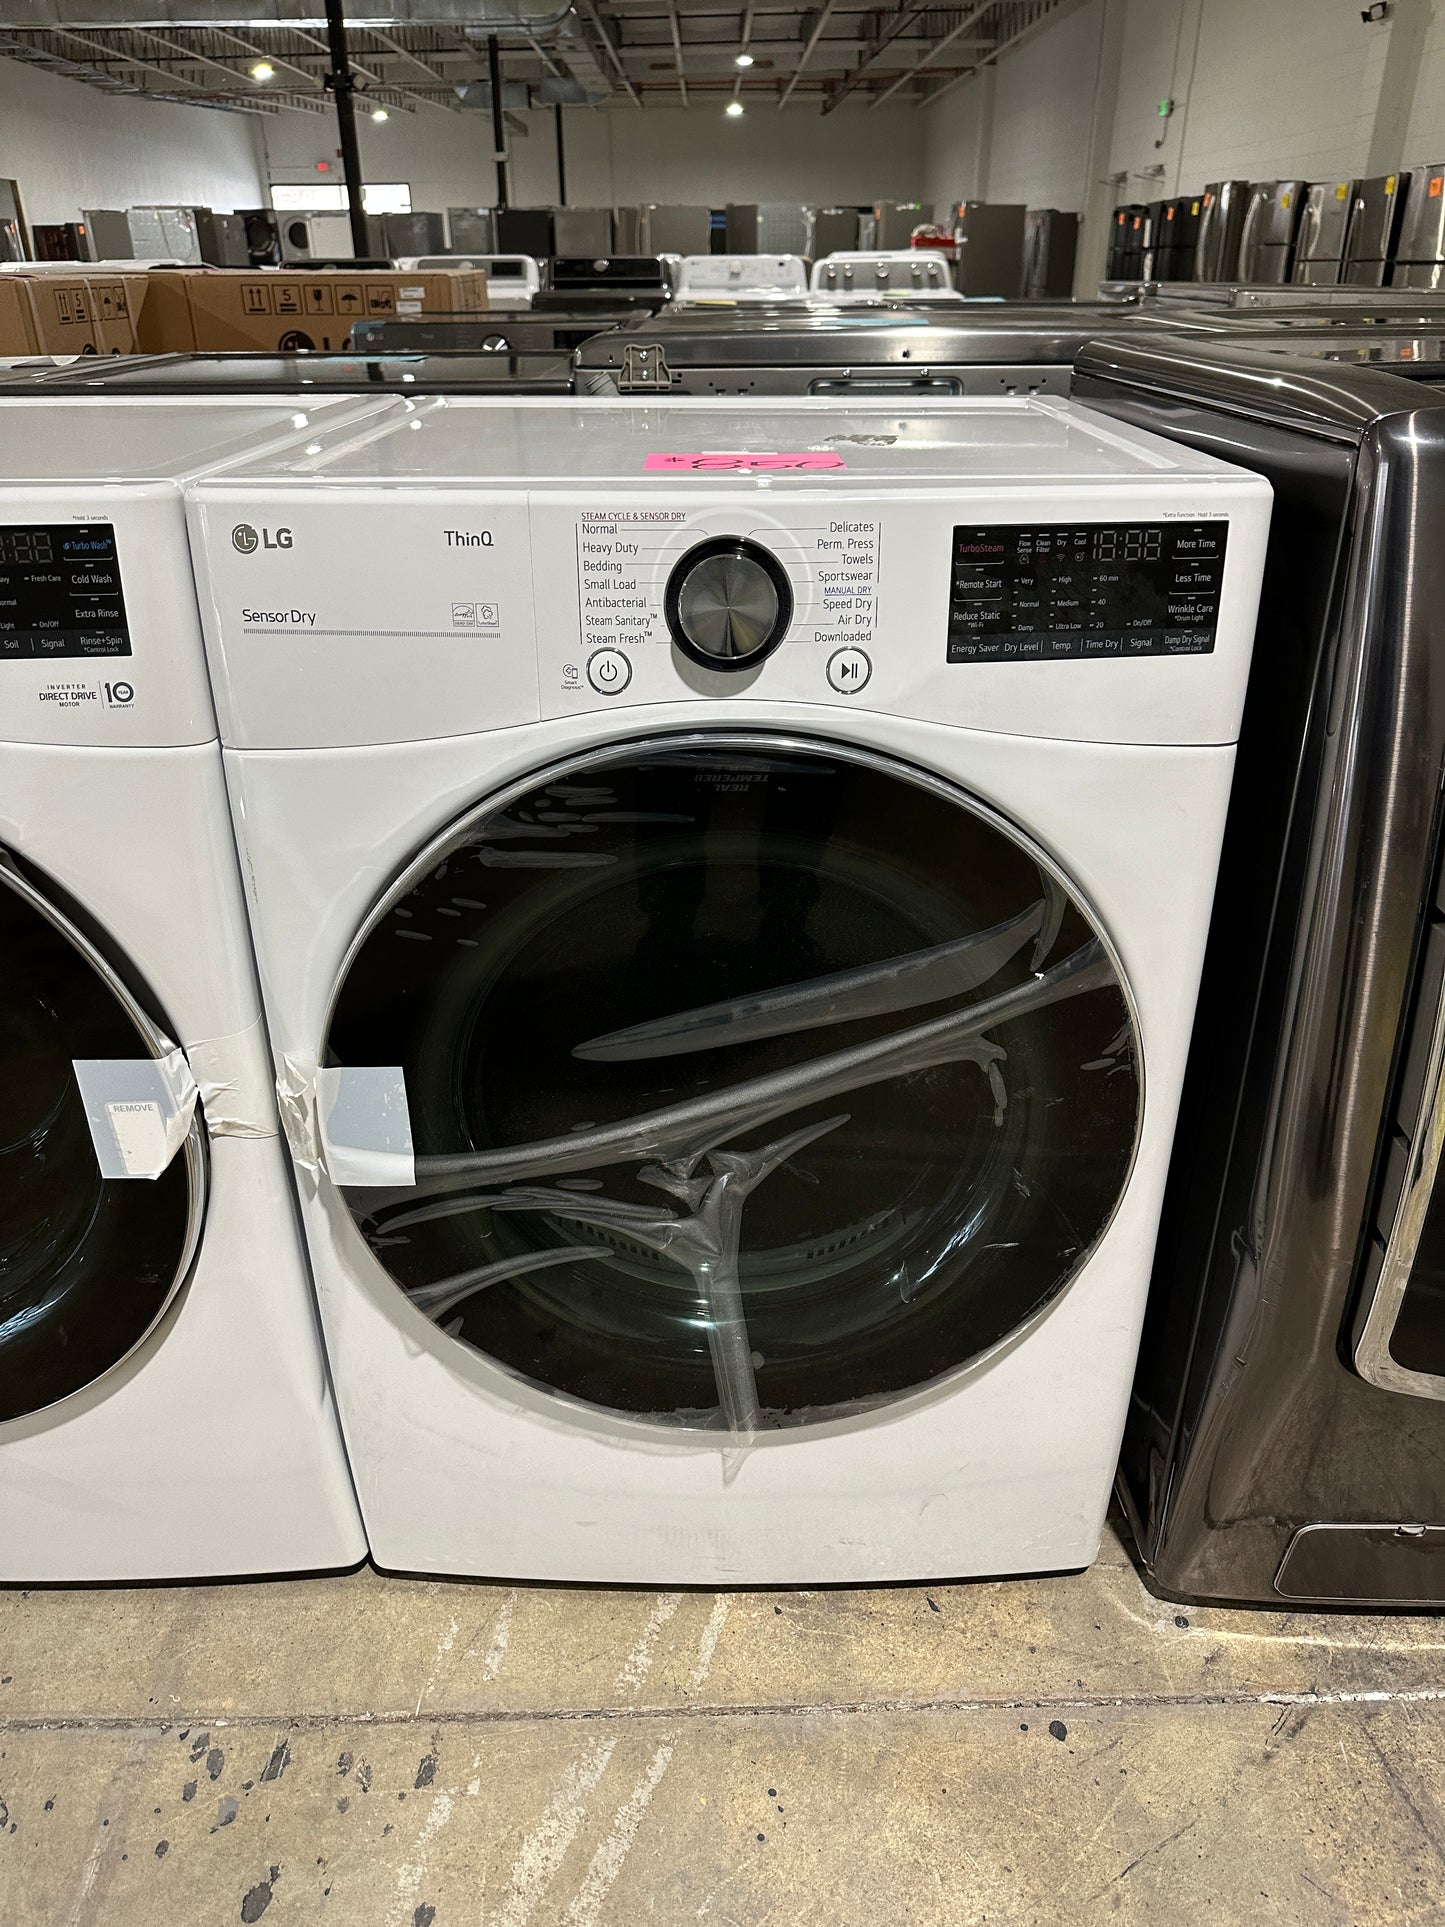 GREAT NEW LG ELECTRIC DRYER WITH STEAM - DRY11497S DLEX4200W